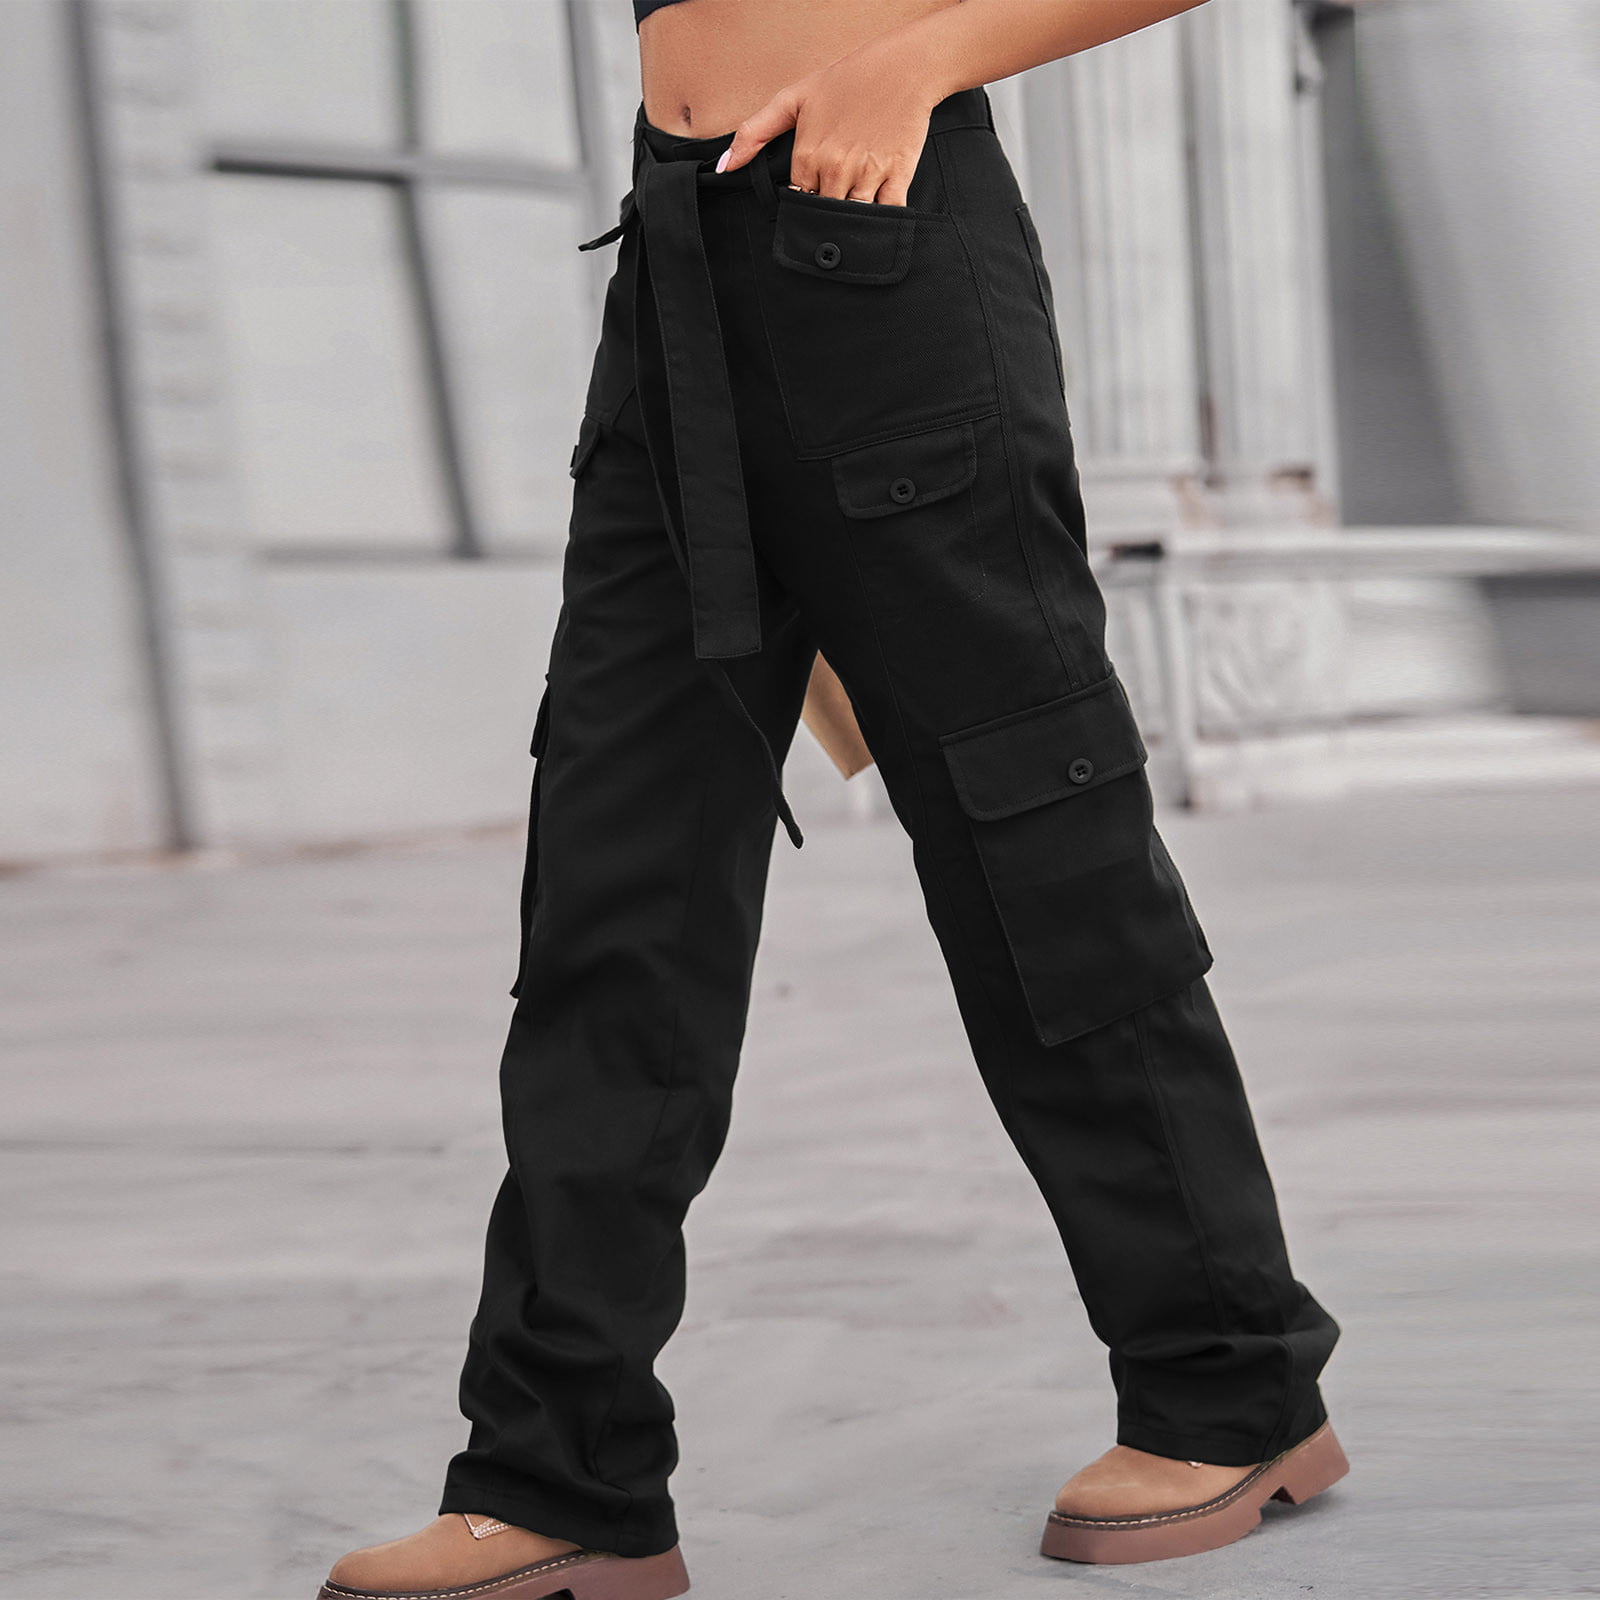 Tdoqot Women's Cargo Pants- with Pockets High weight Casual